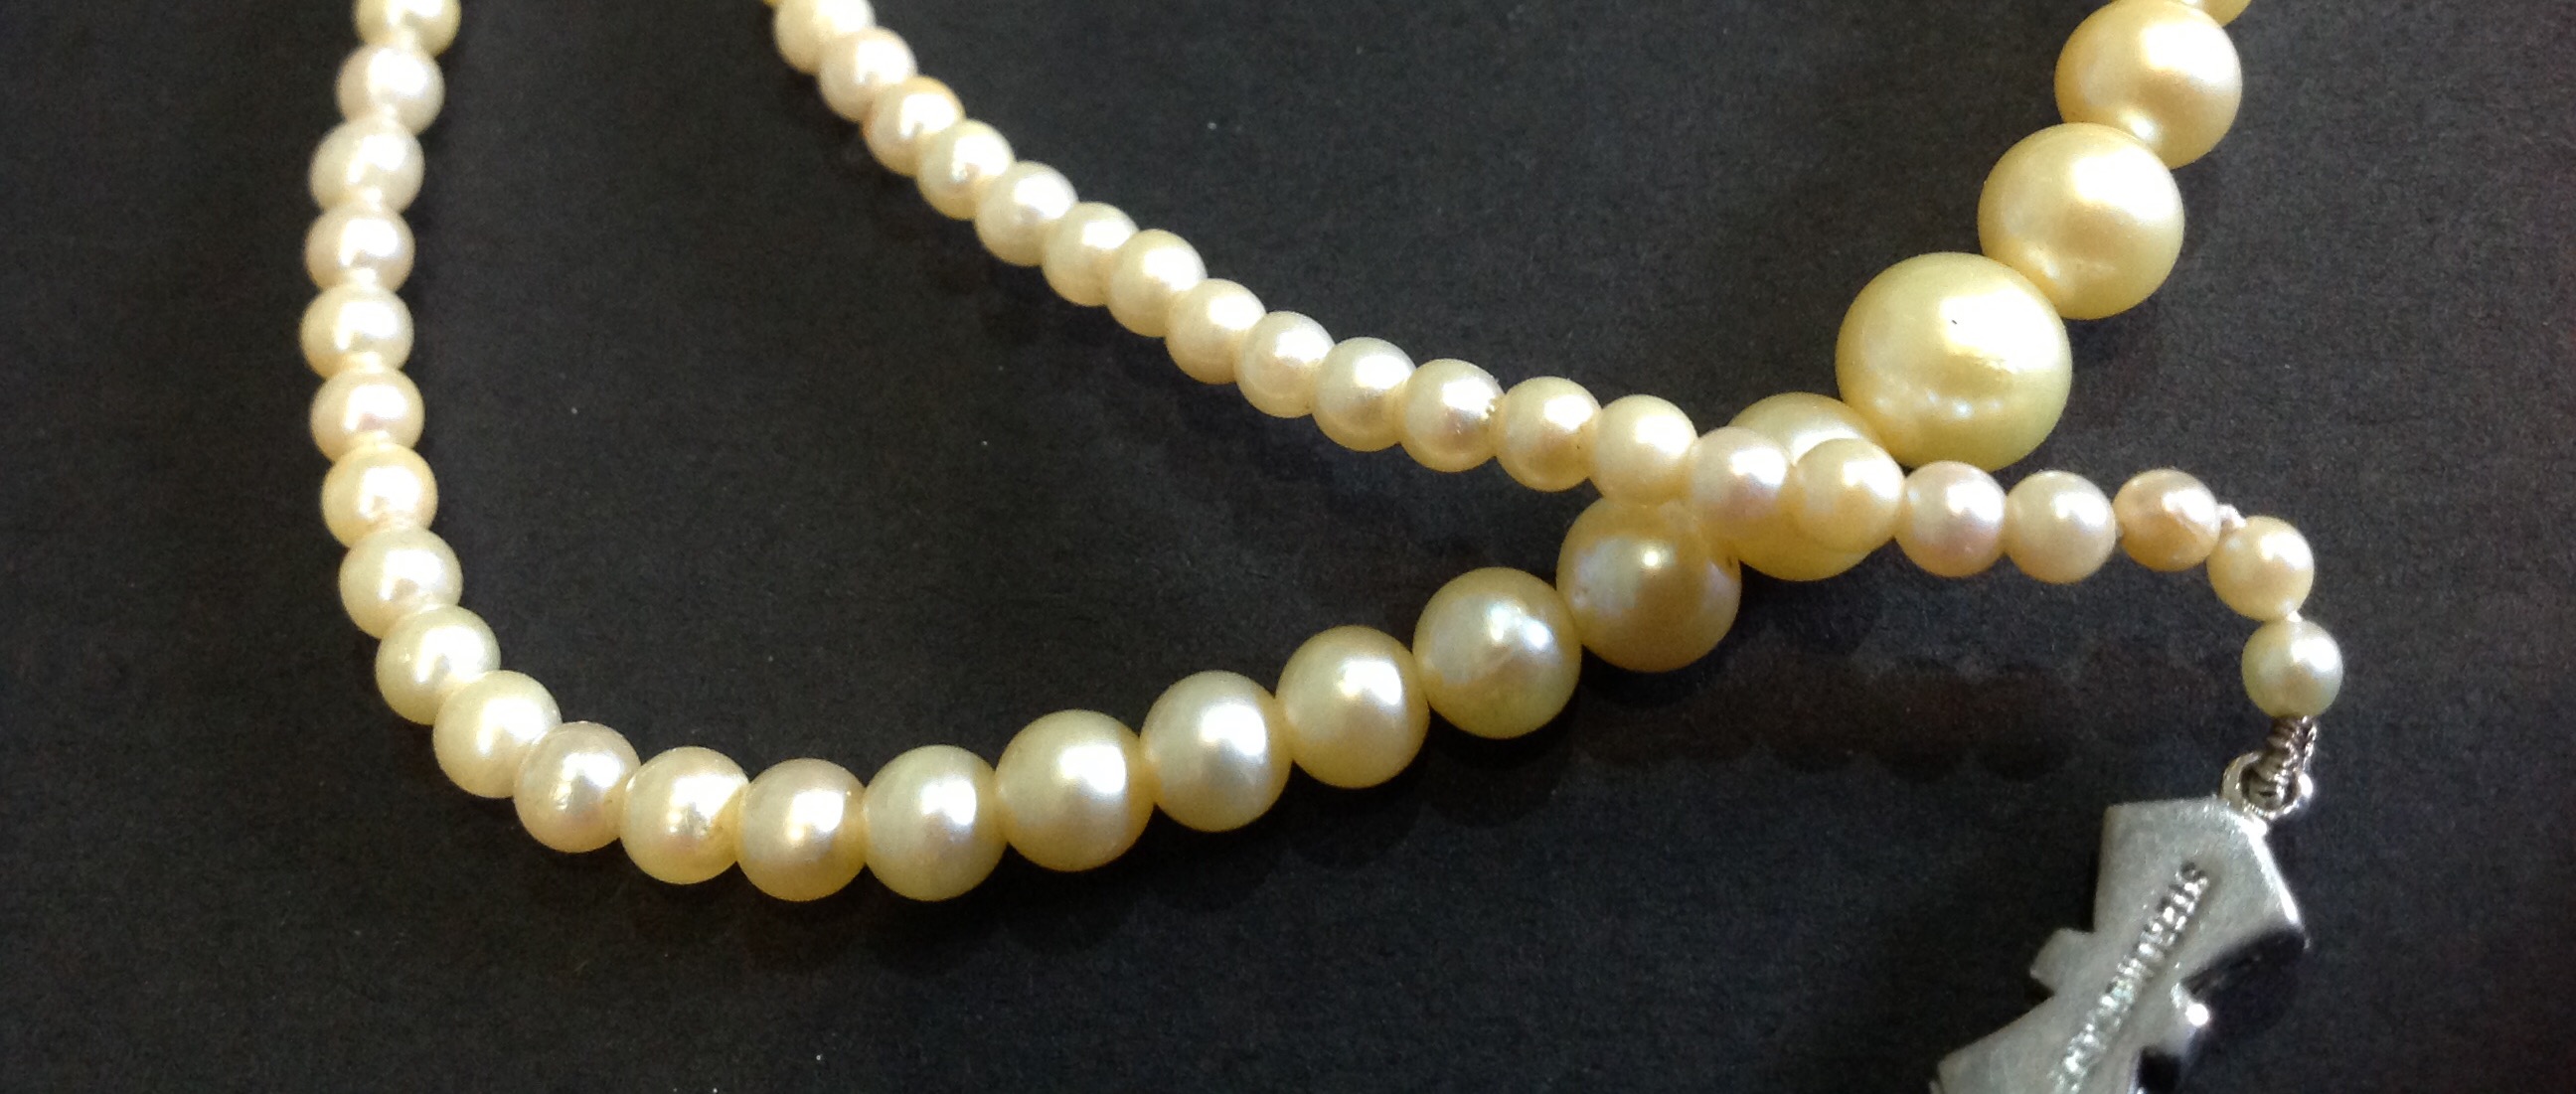 Pearls - saltwater? | Antiques Board